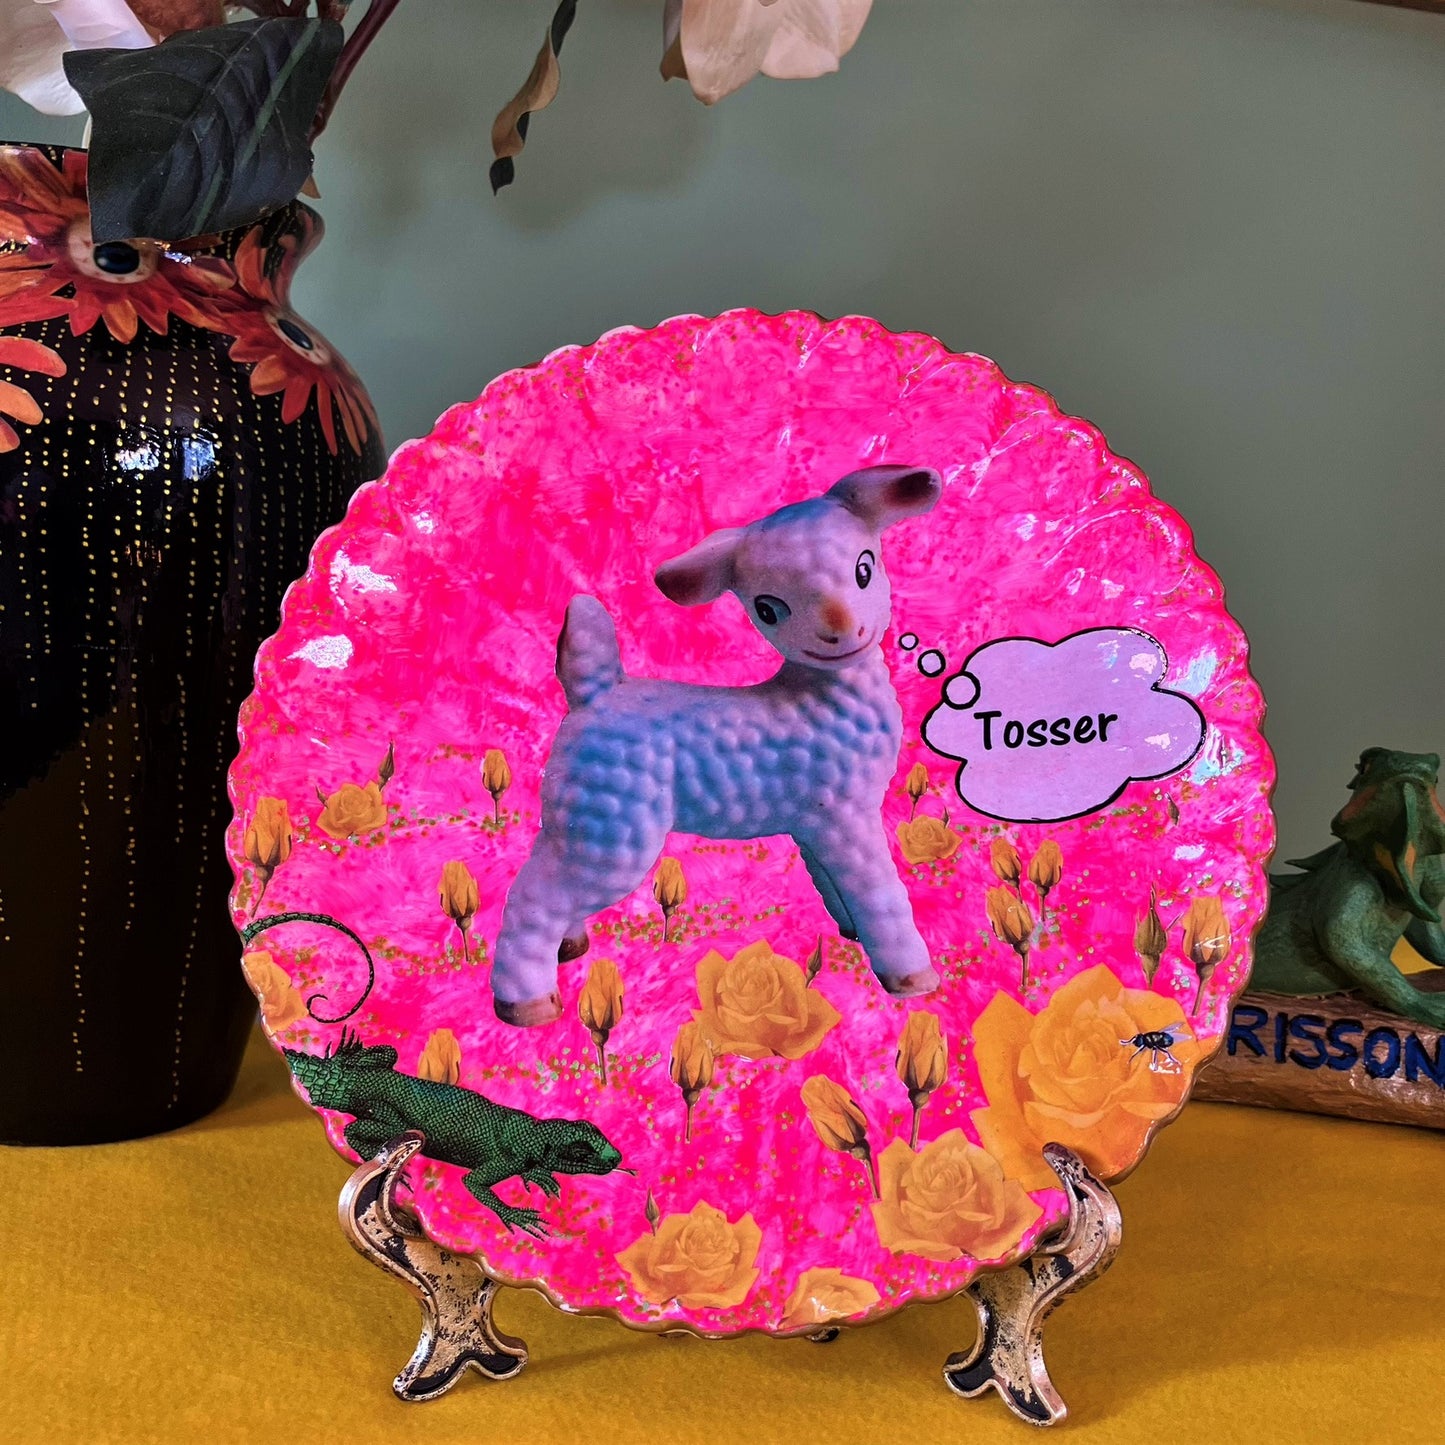 Pink Upcycled Wall Plate - "Tosser" - by House of Frisson